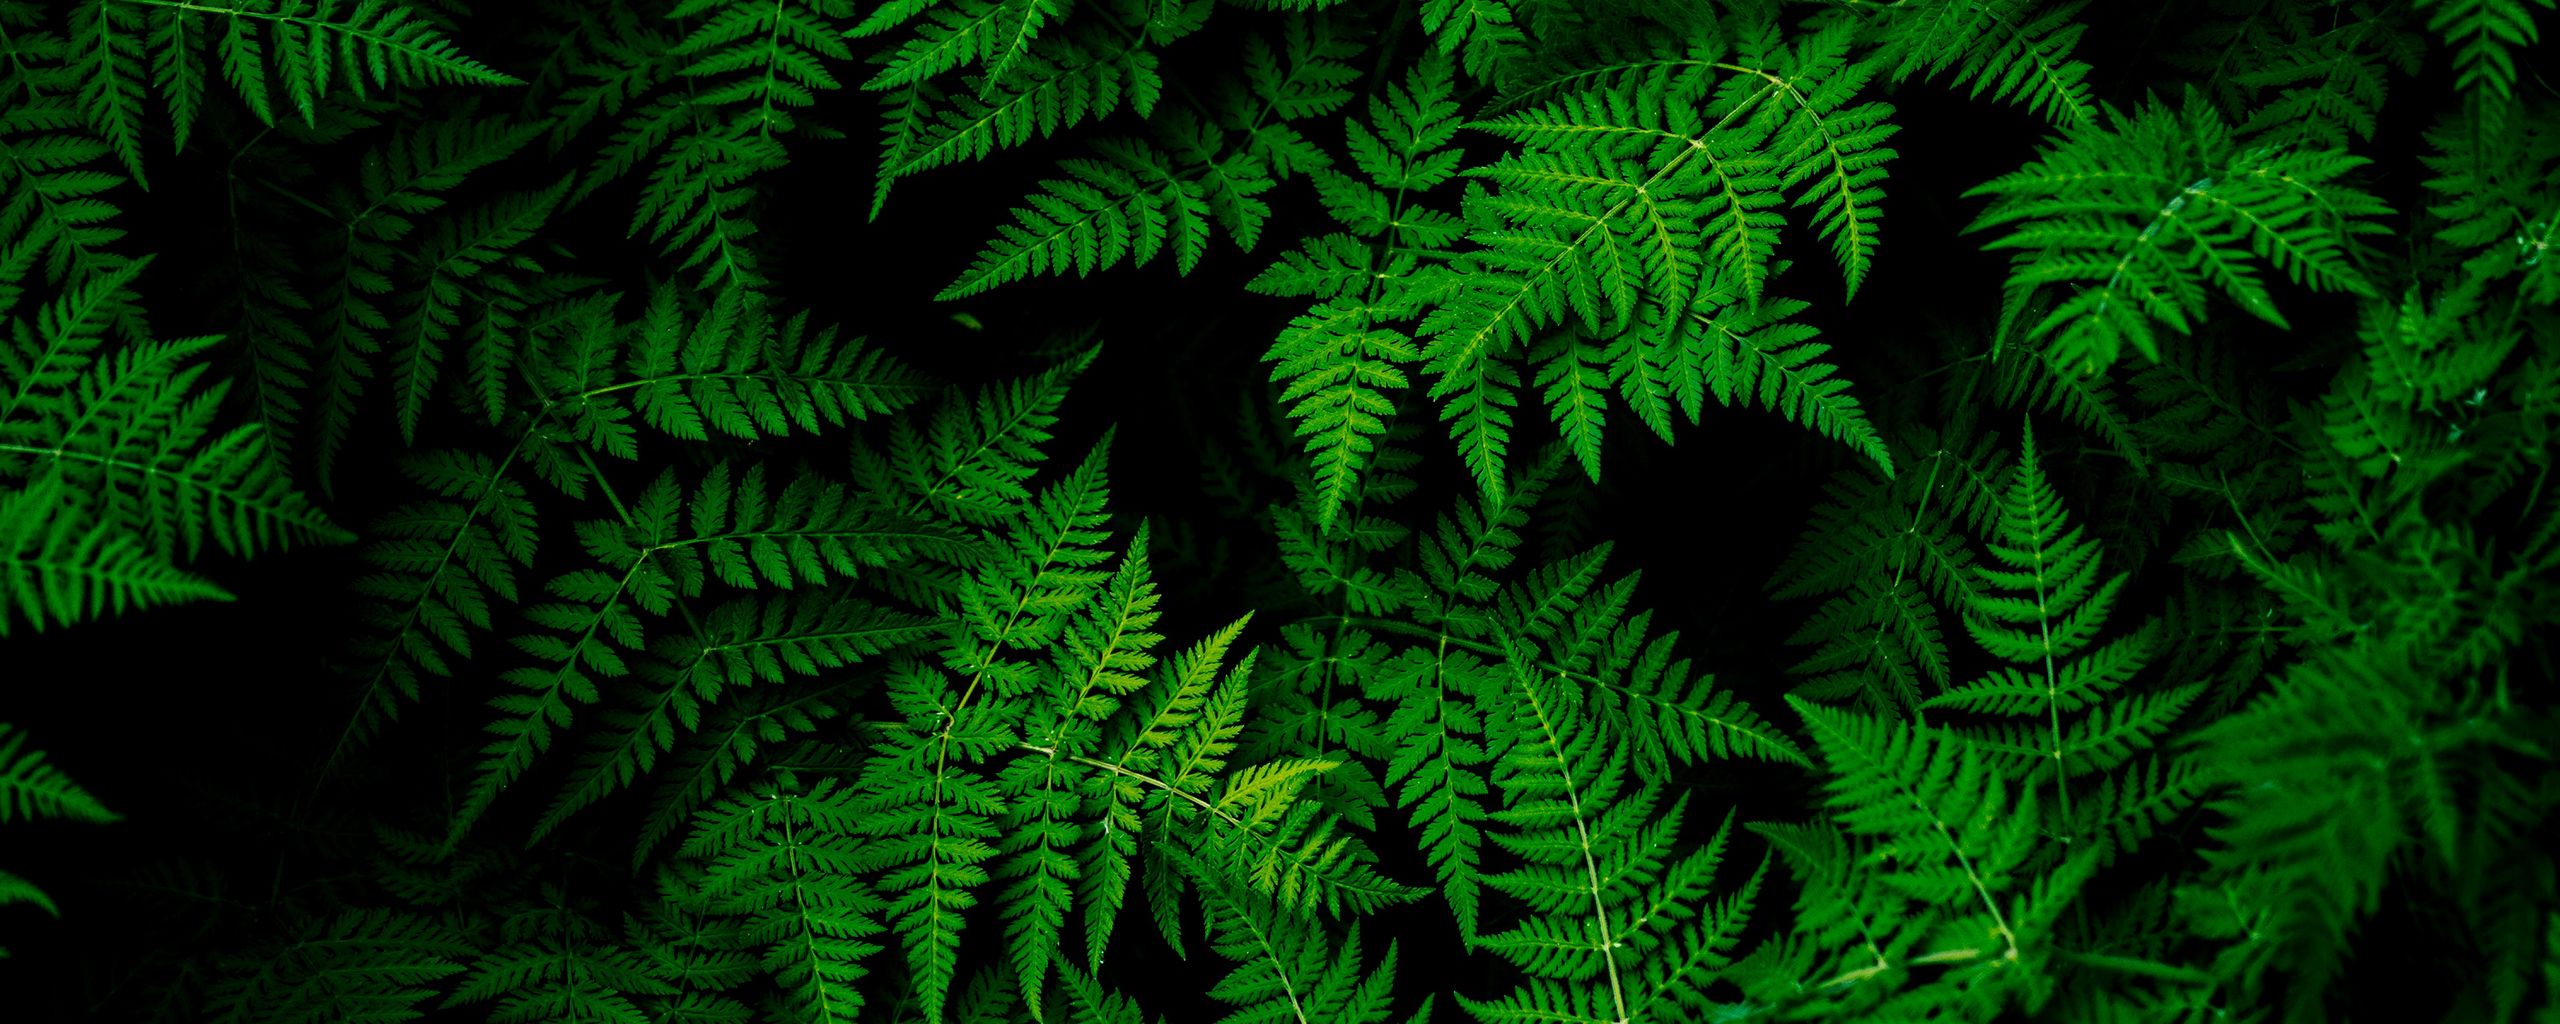 Leaves Plant Green 118405 2560x1024 